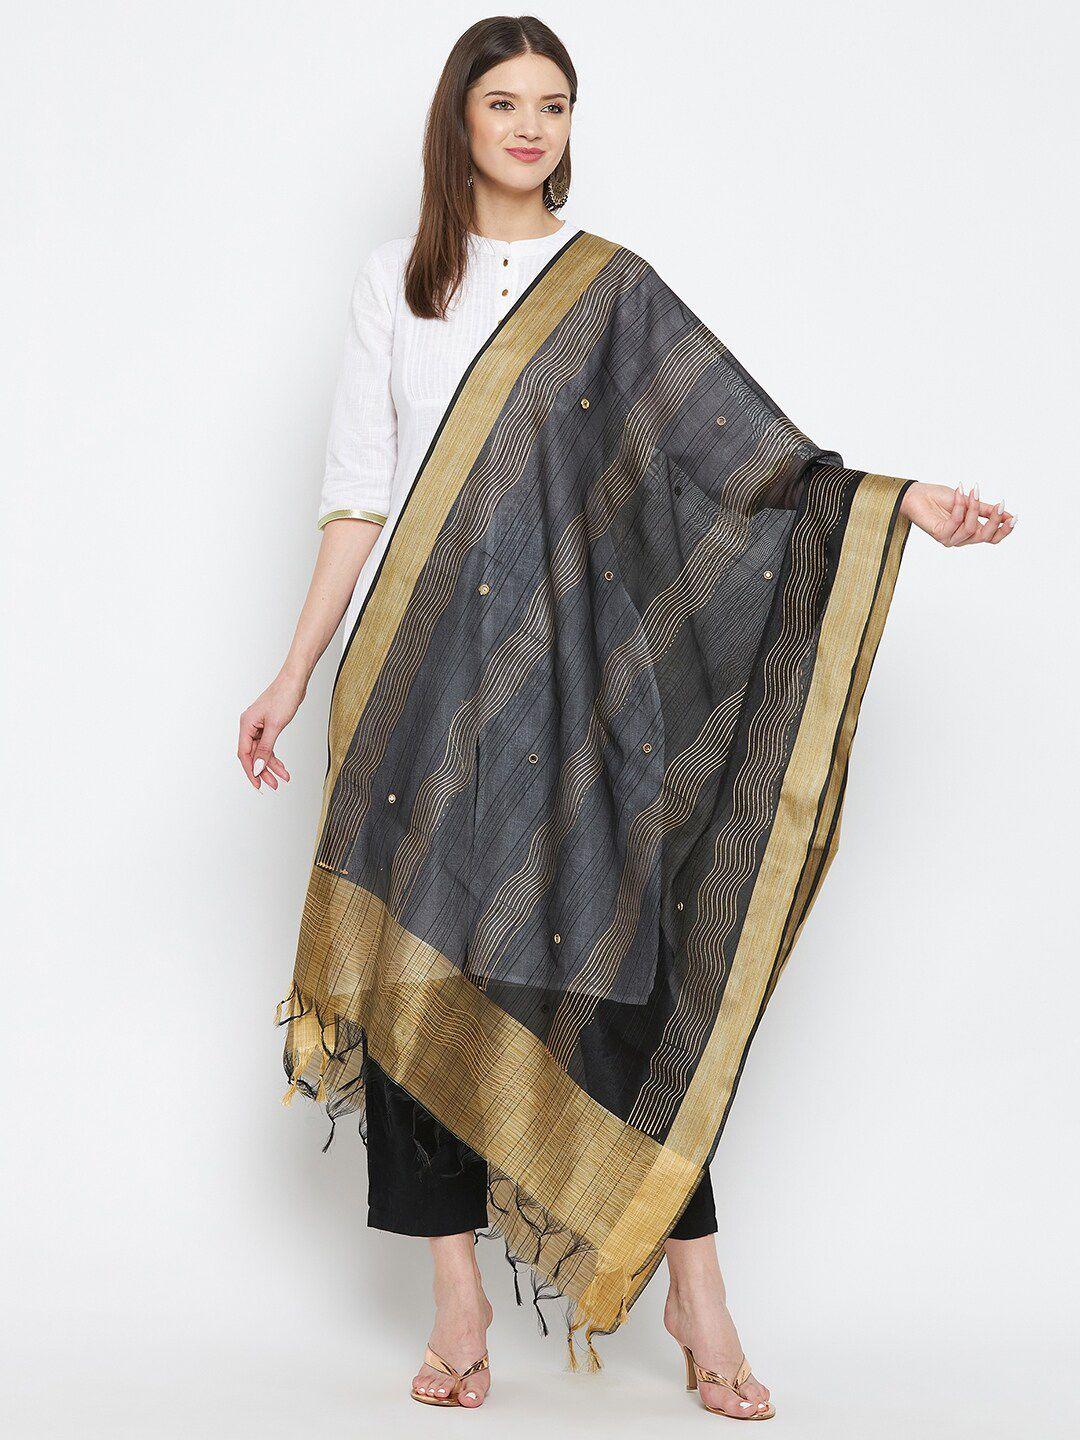 clora creation black & beige striped dupatta with beads and stones